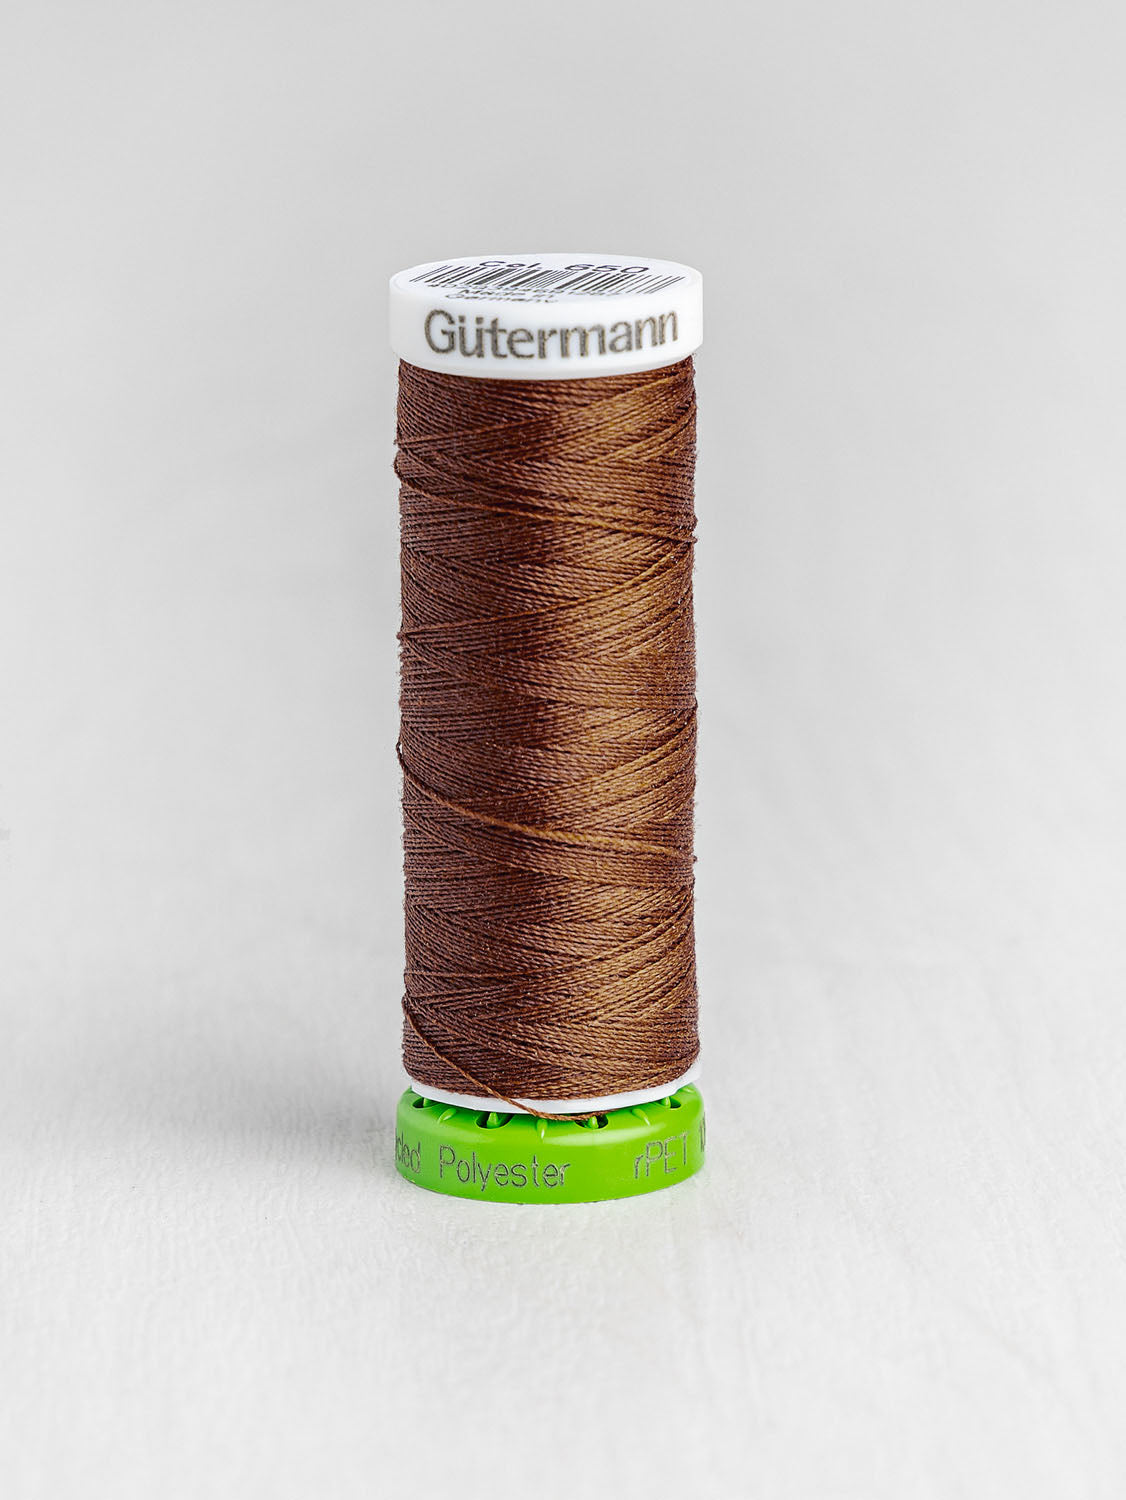 Gütermann All Purpose rPET Recycled Thread - Gingerbread 650 | Core Fabrics